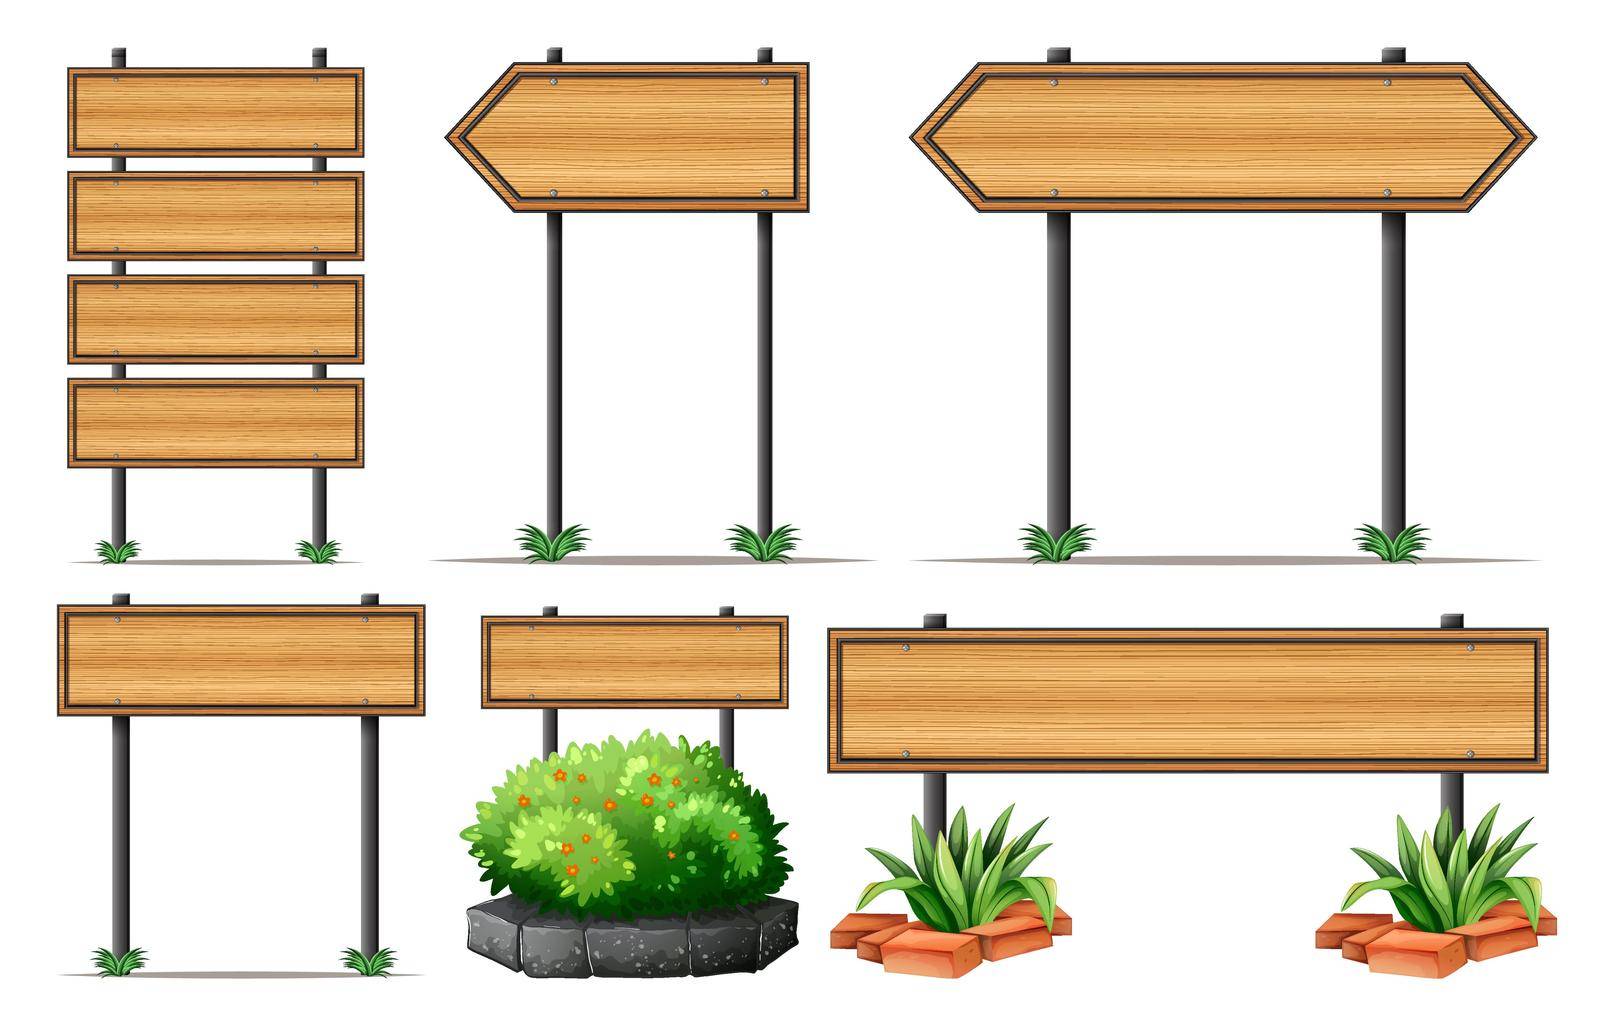 Wooden signs and bush illustration